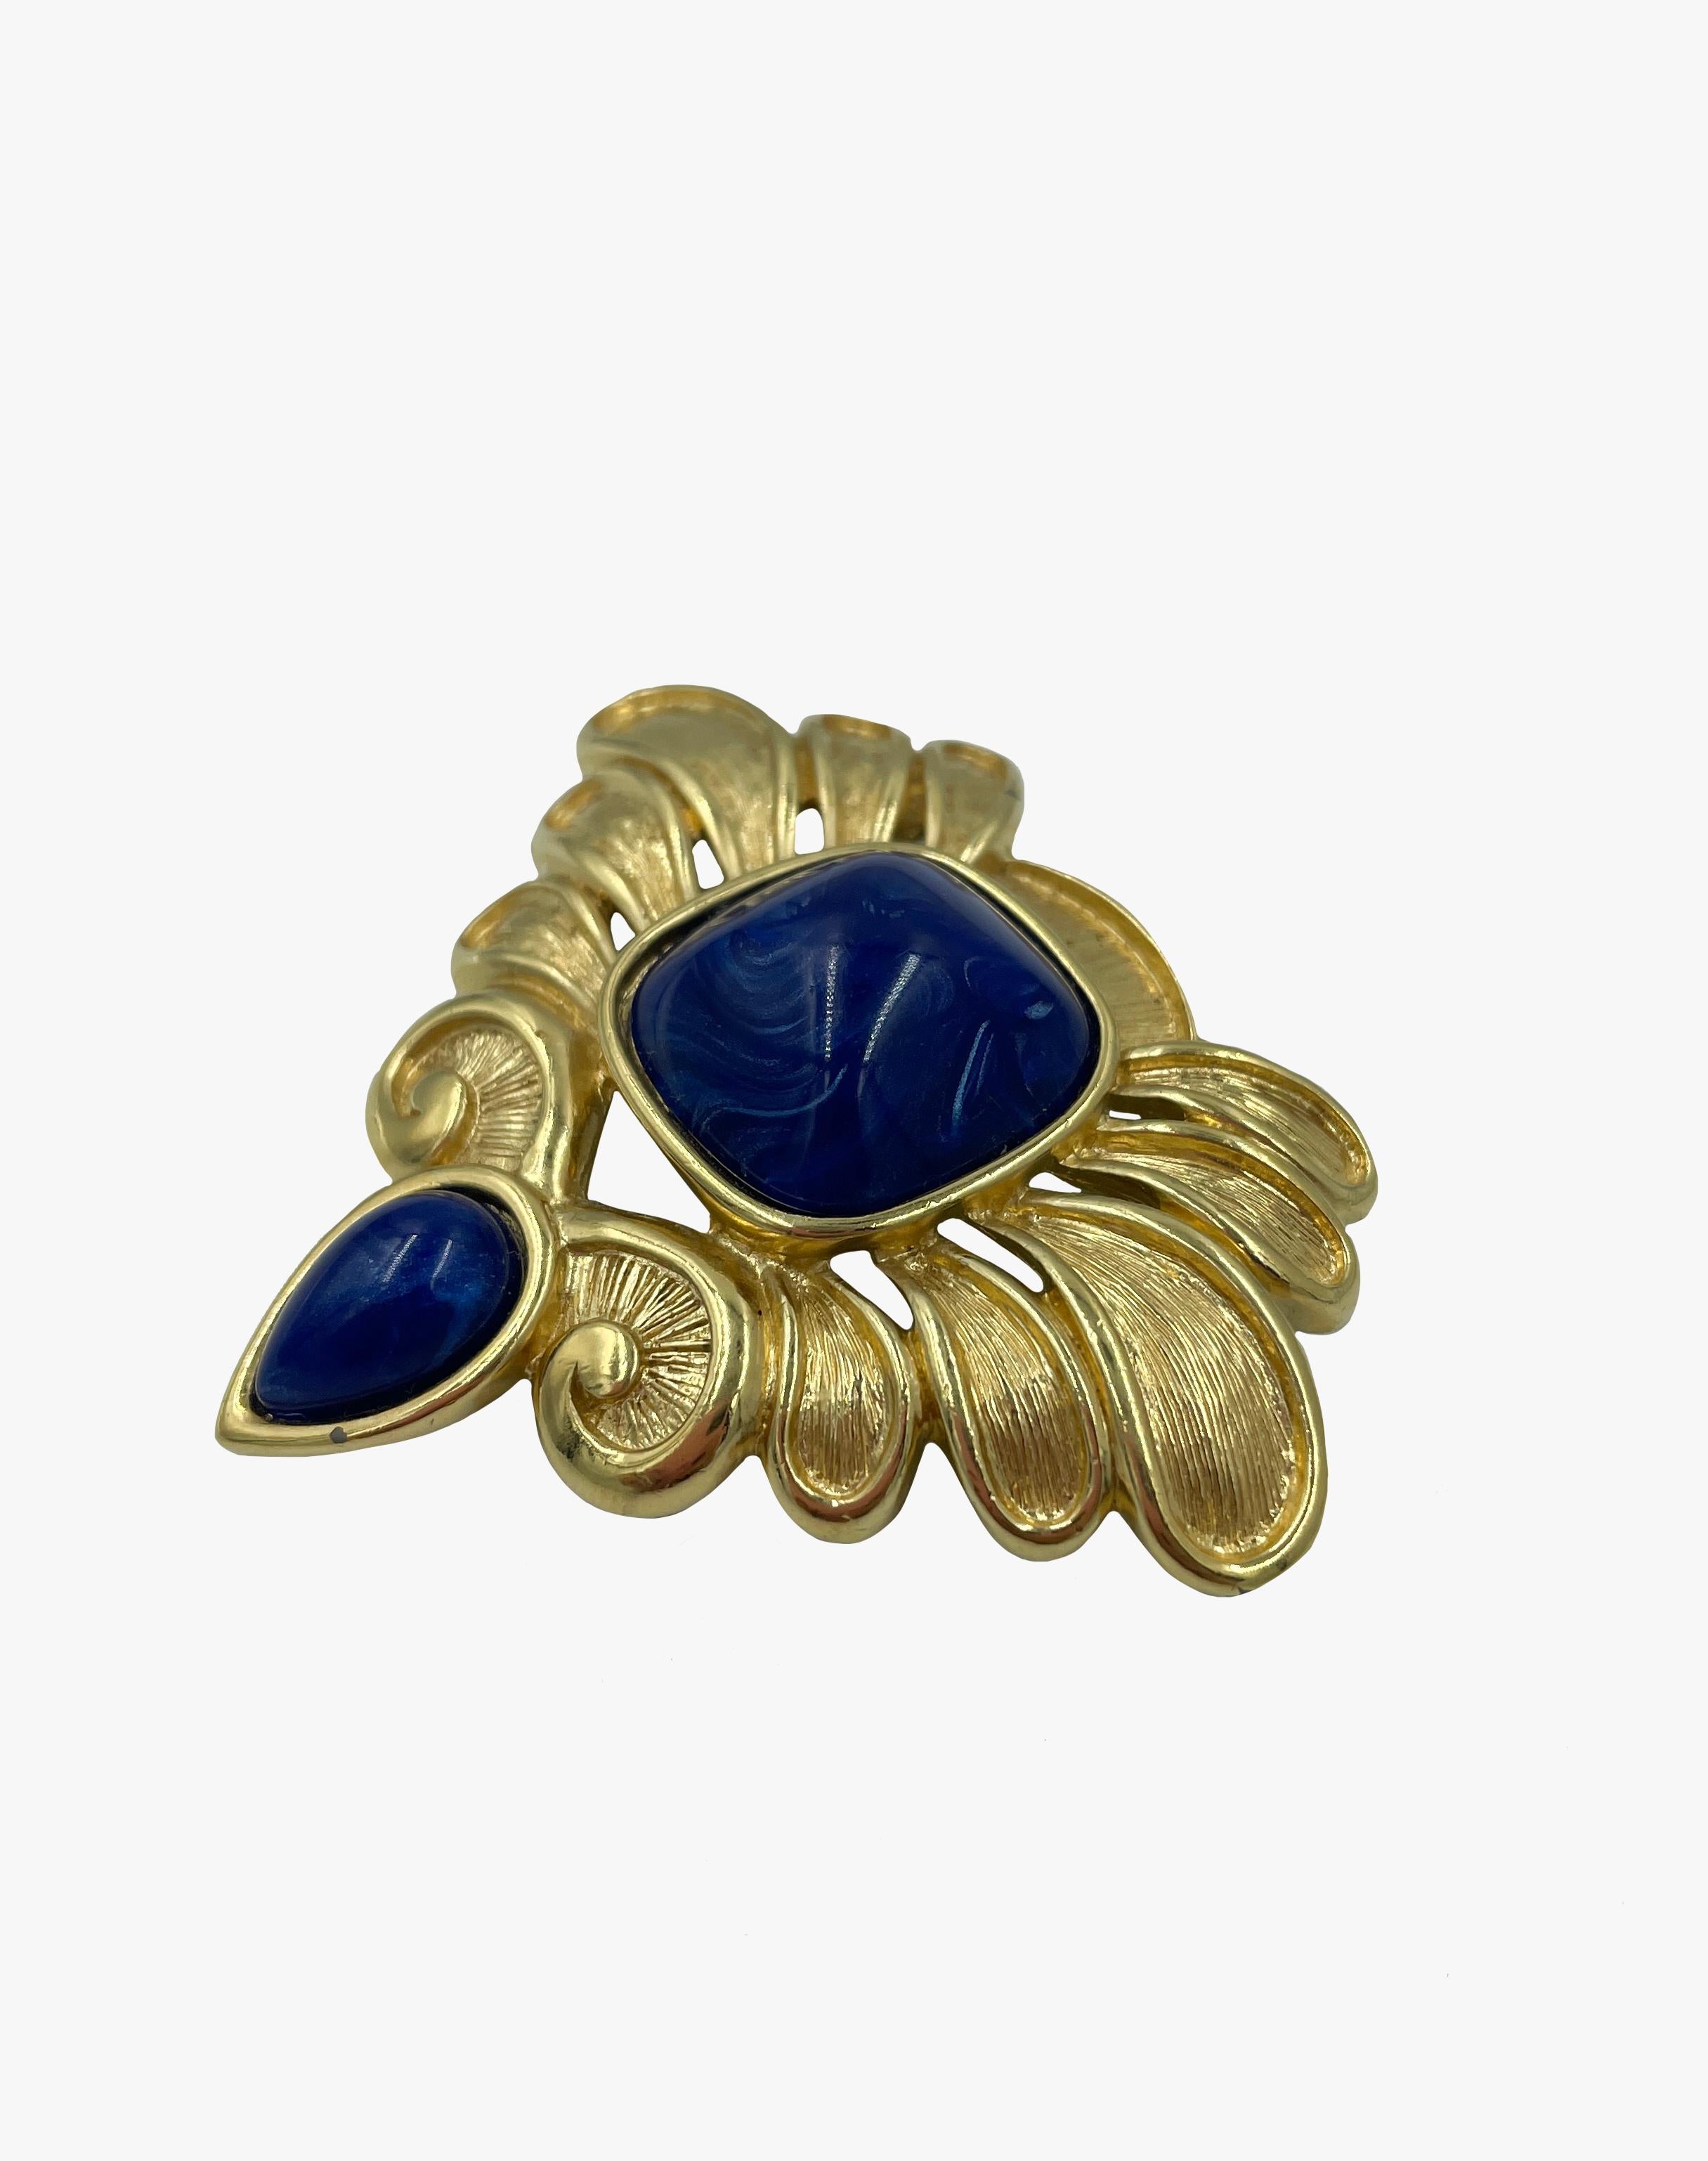 Gorgeous gold tone vintage Trifari brooch with blue inserts

Dimensions – 5 x 5 cm

Signed

Condition – very good

........Additional information ........

- Photo might be slightly different from actual item in terms of color due to the lighting